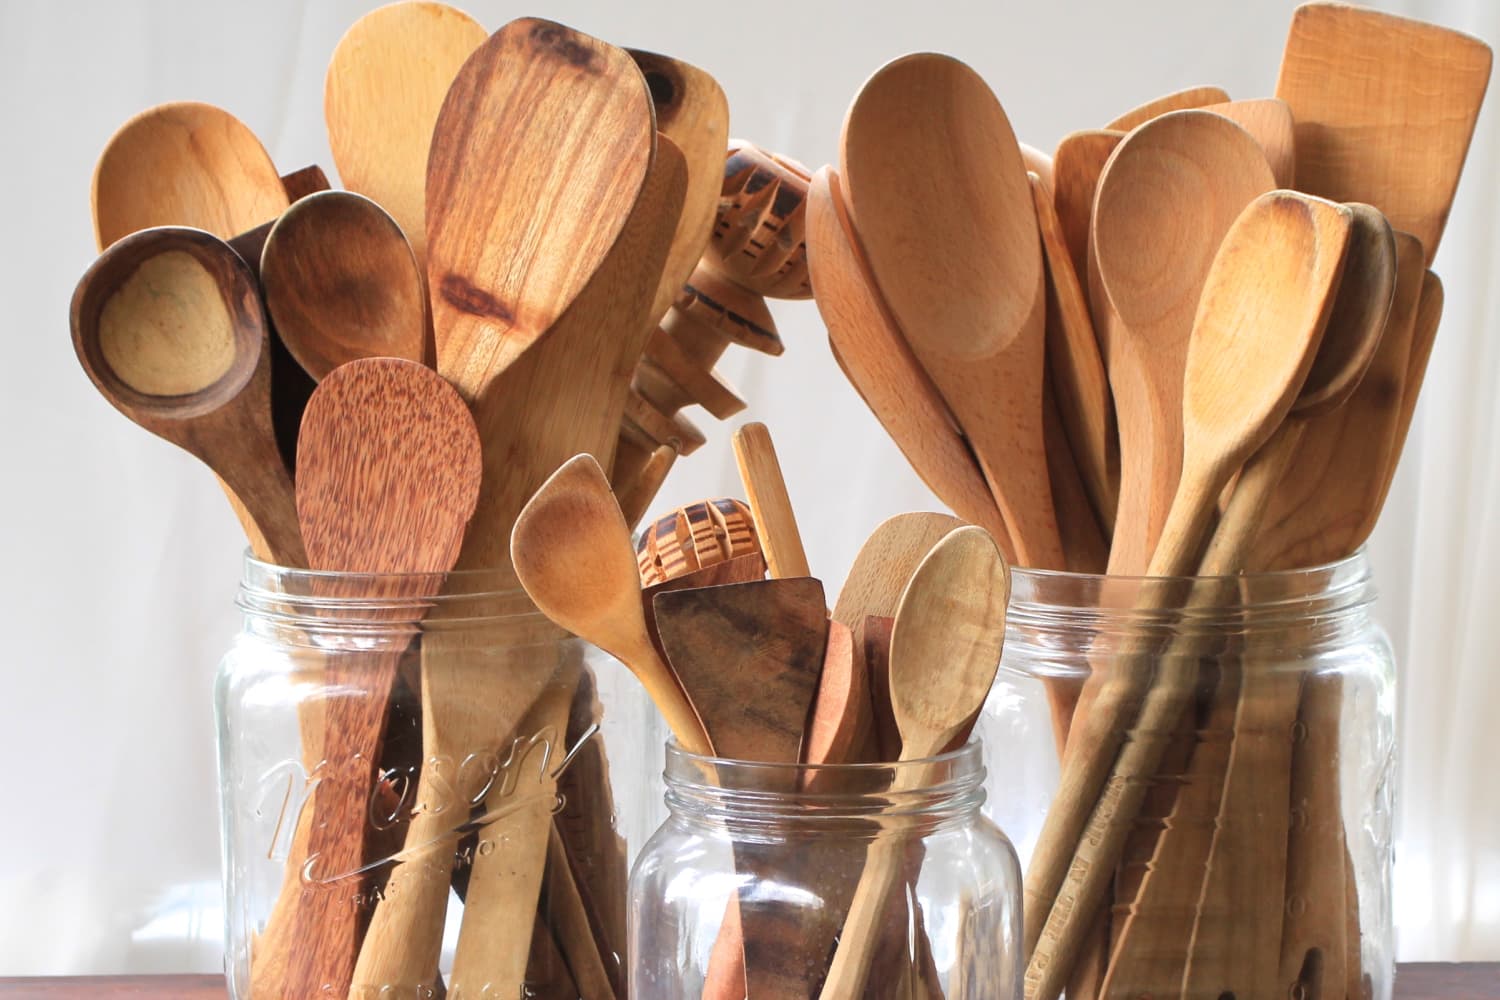 How to Care for Wooden Kitchen Utensils